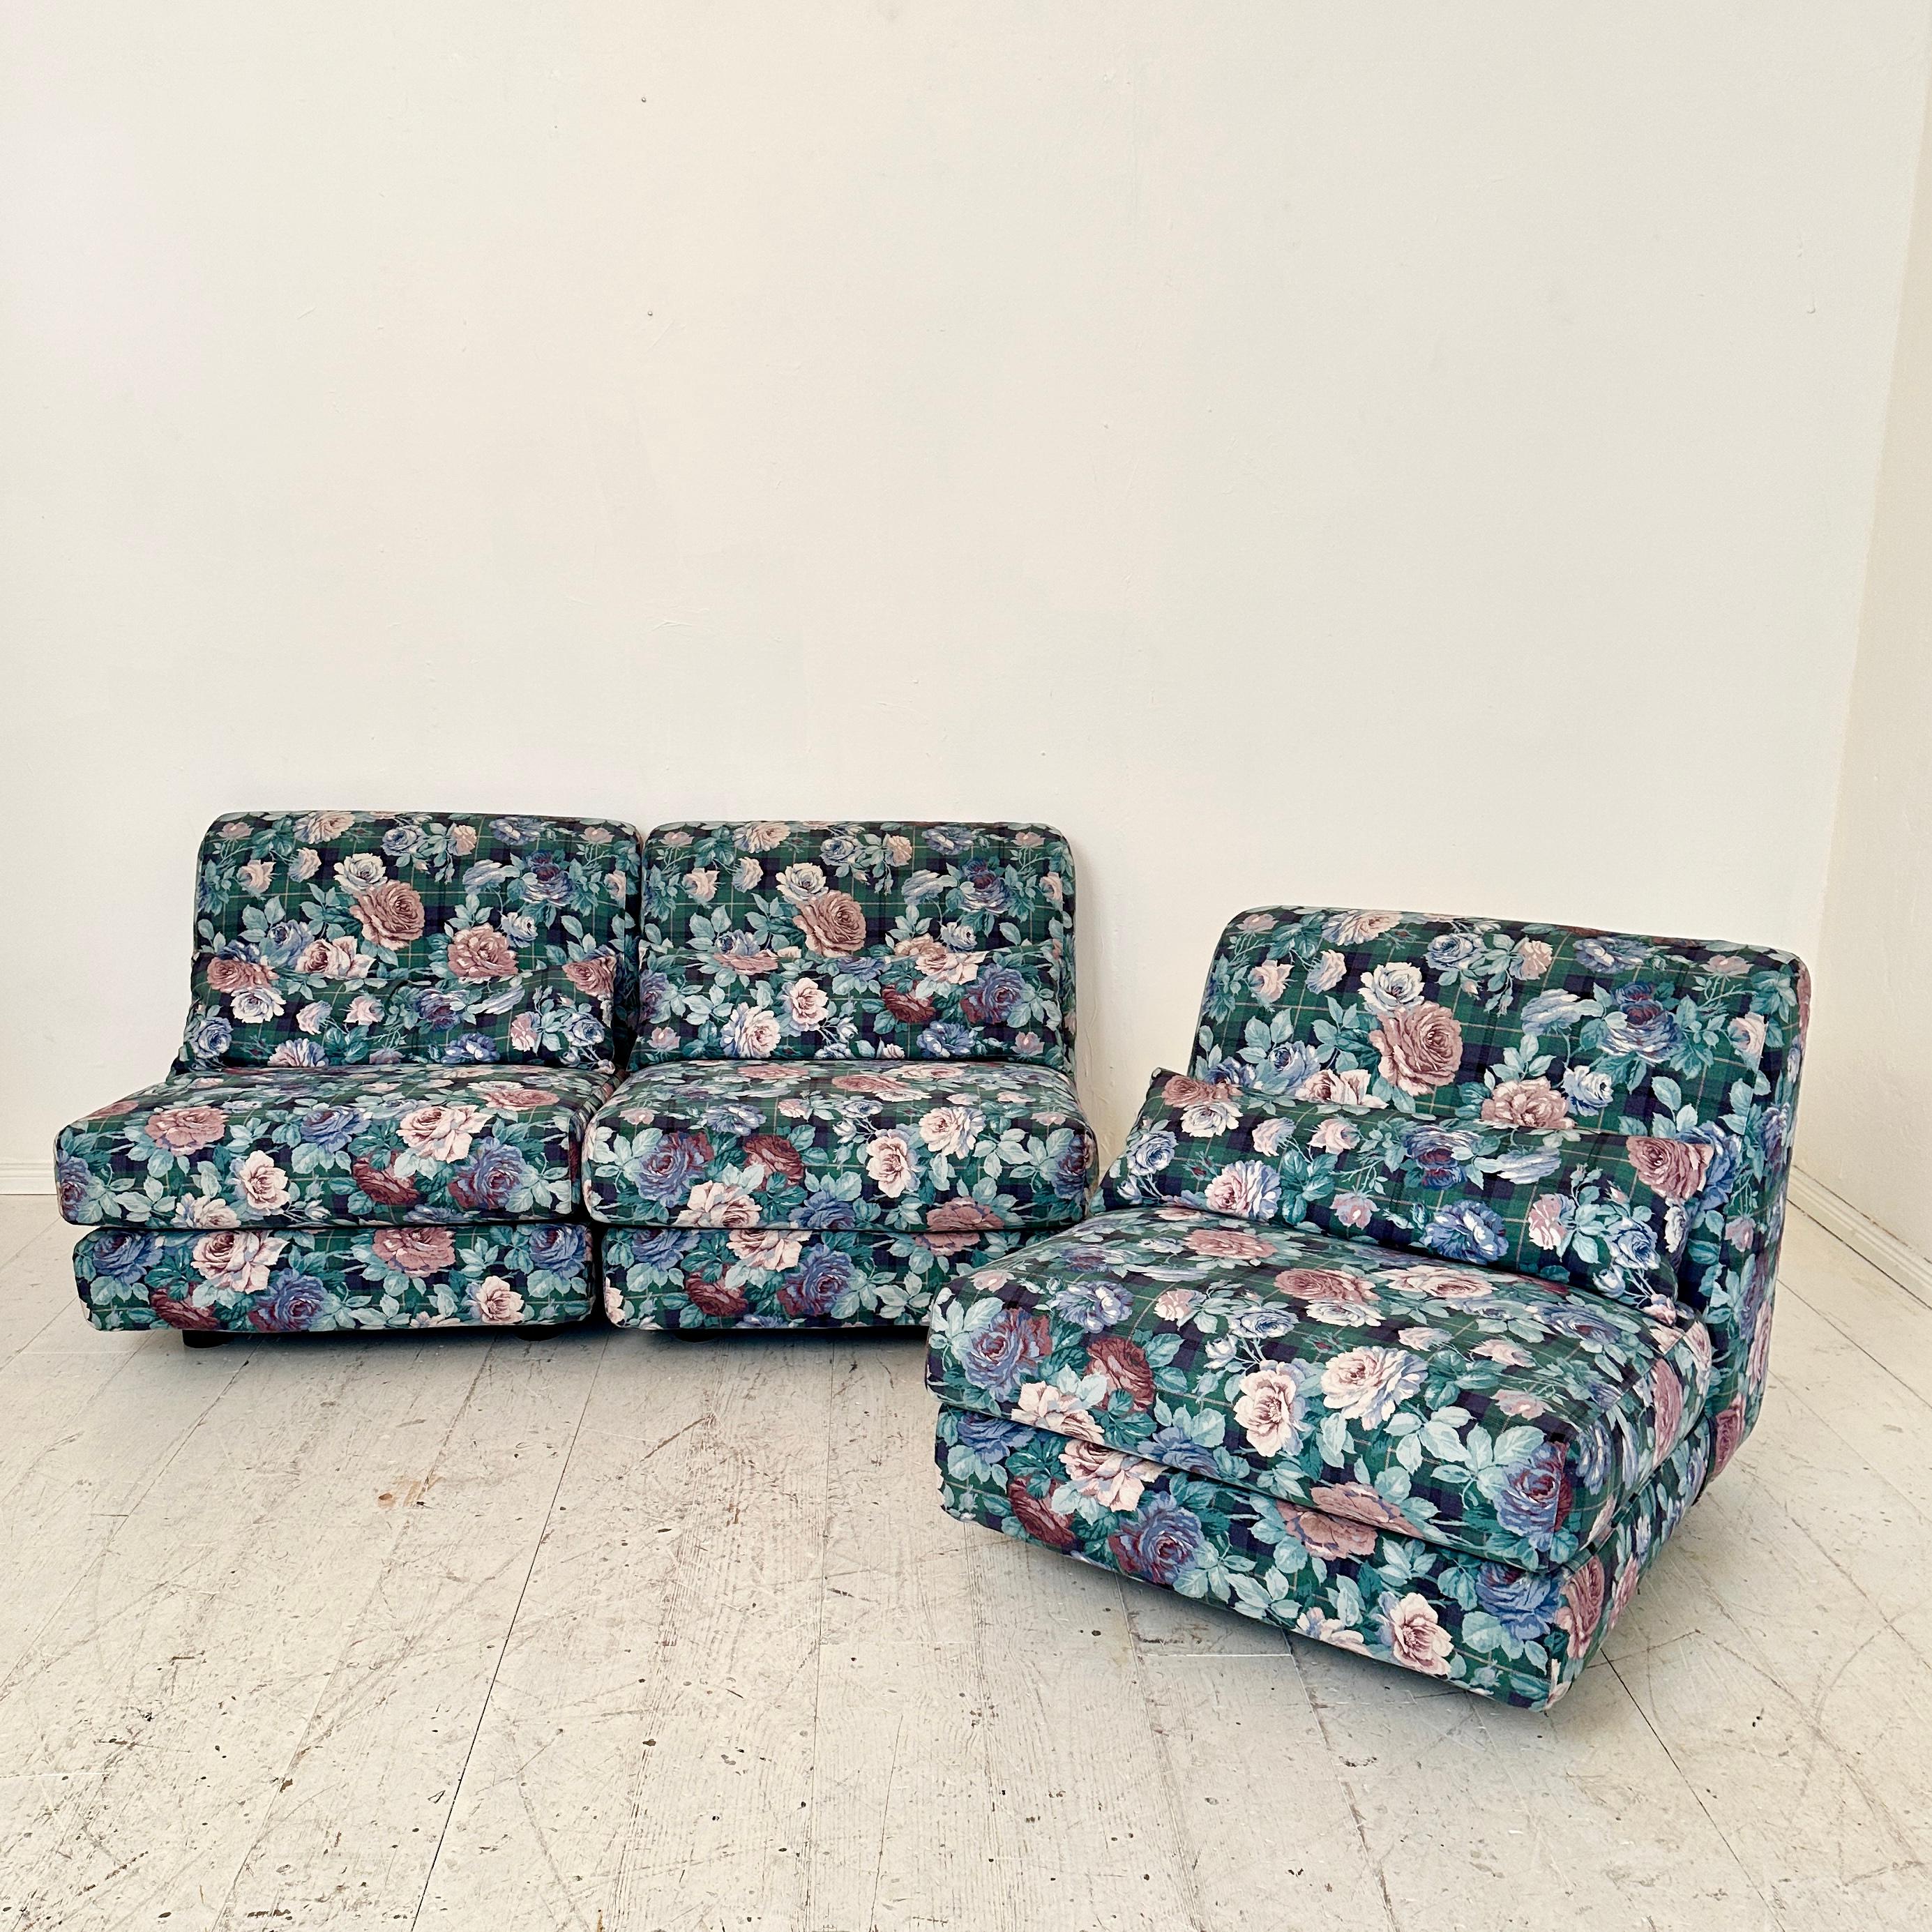 Mid Century Italian Modular Sofa in 3 Pieces with a Flower Fabric, around 1970 For Sale 6